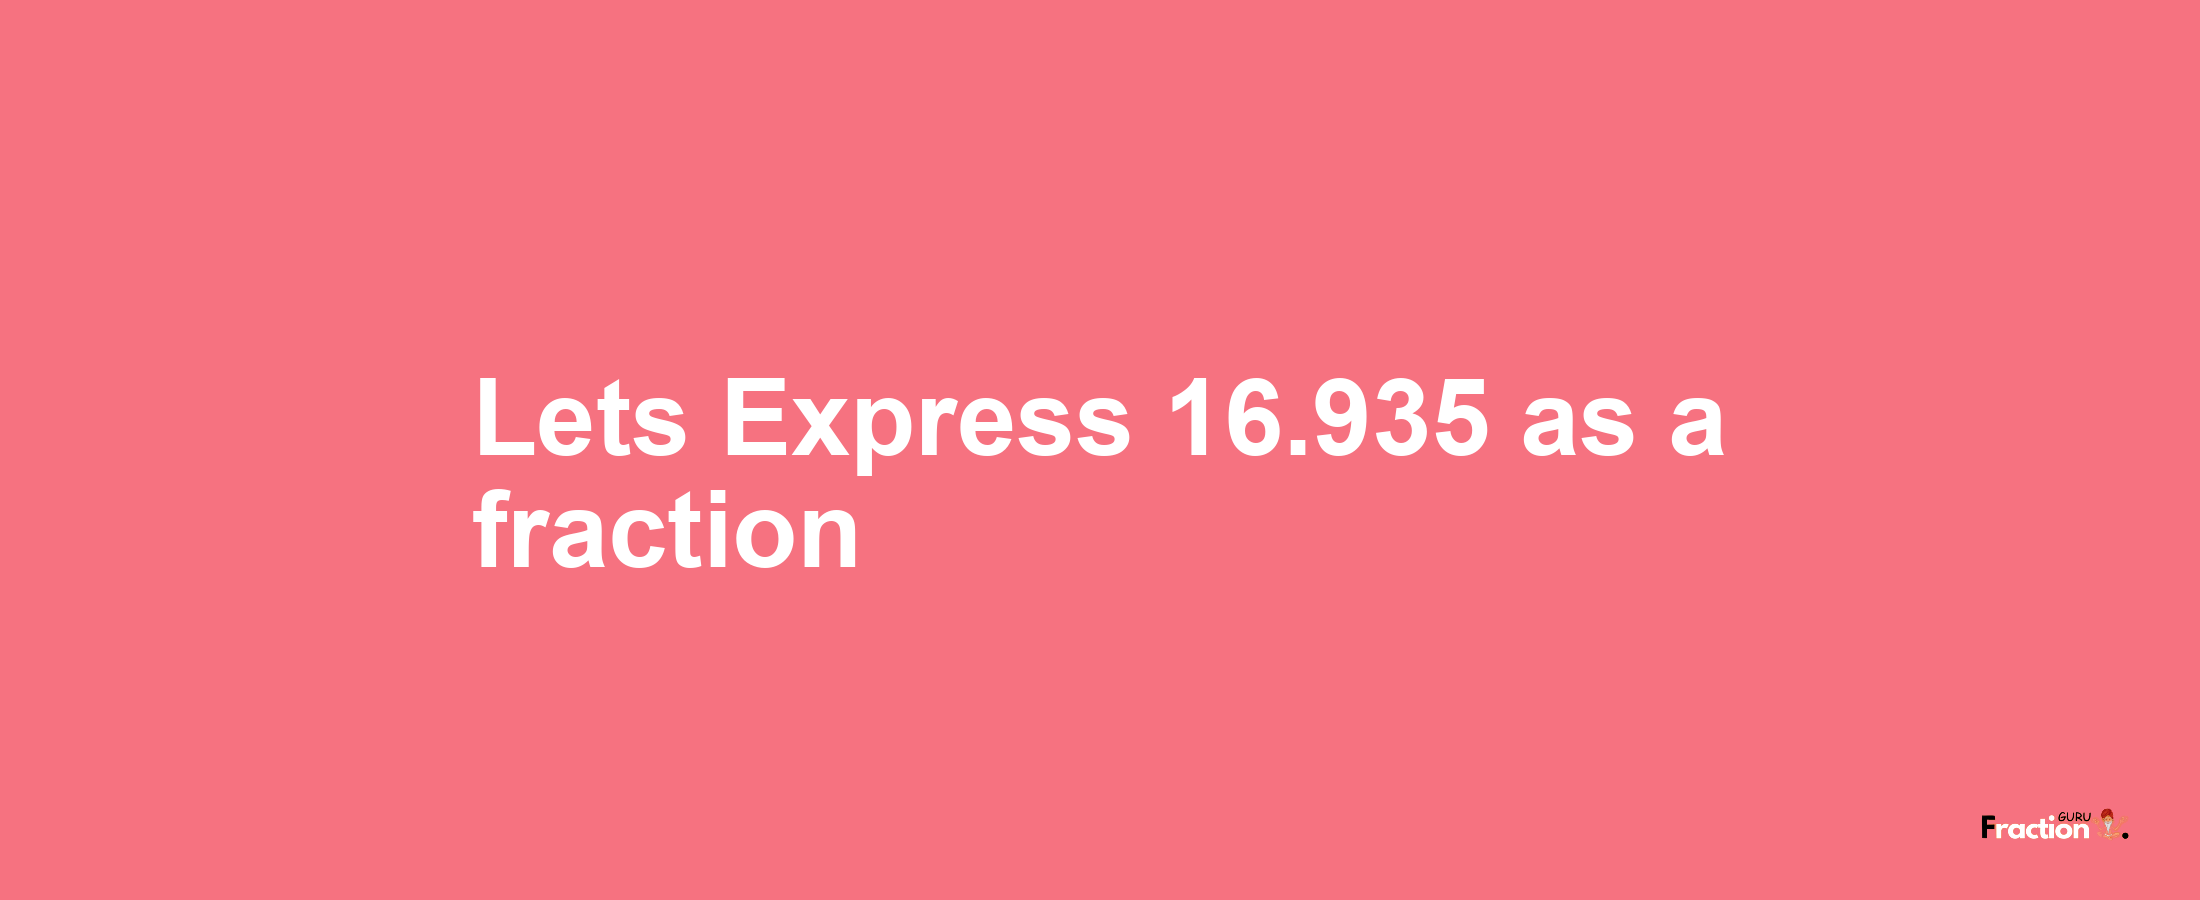 Lets Express 16.935 as afraction